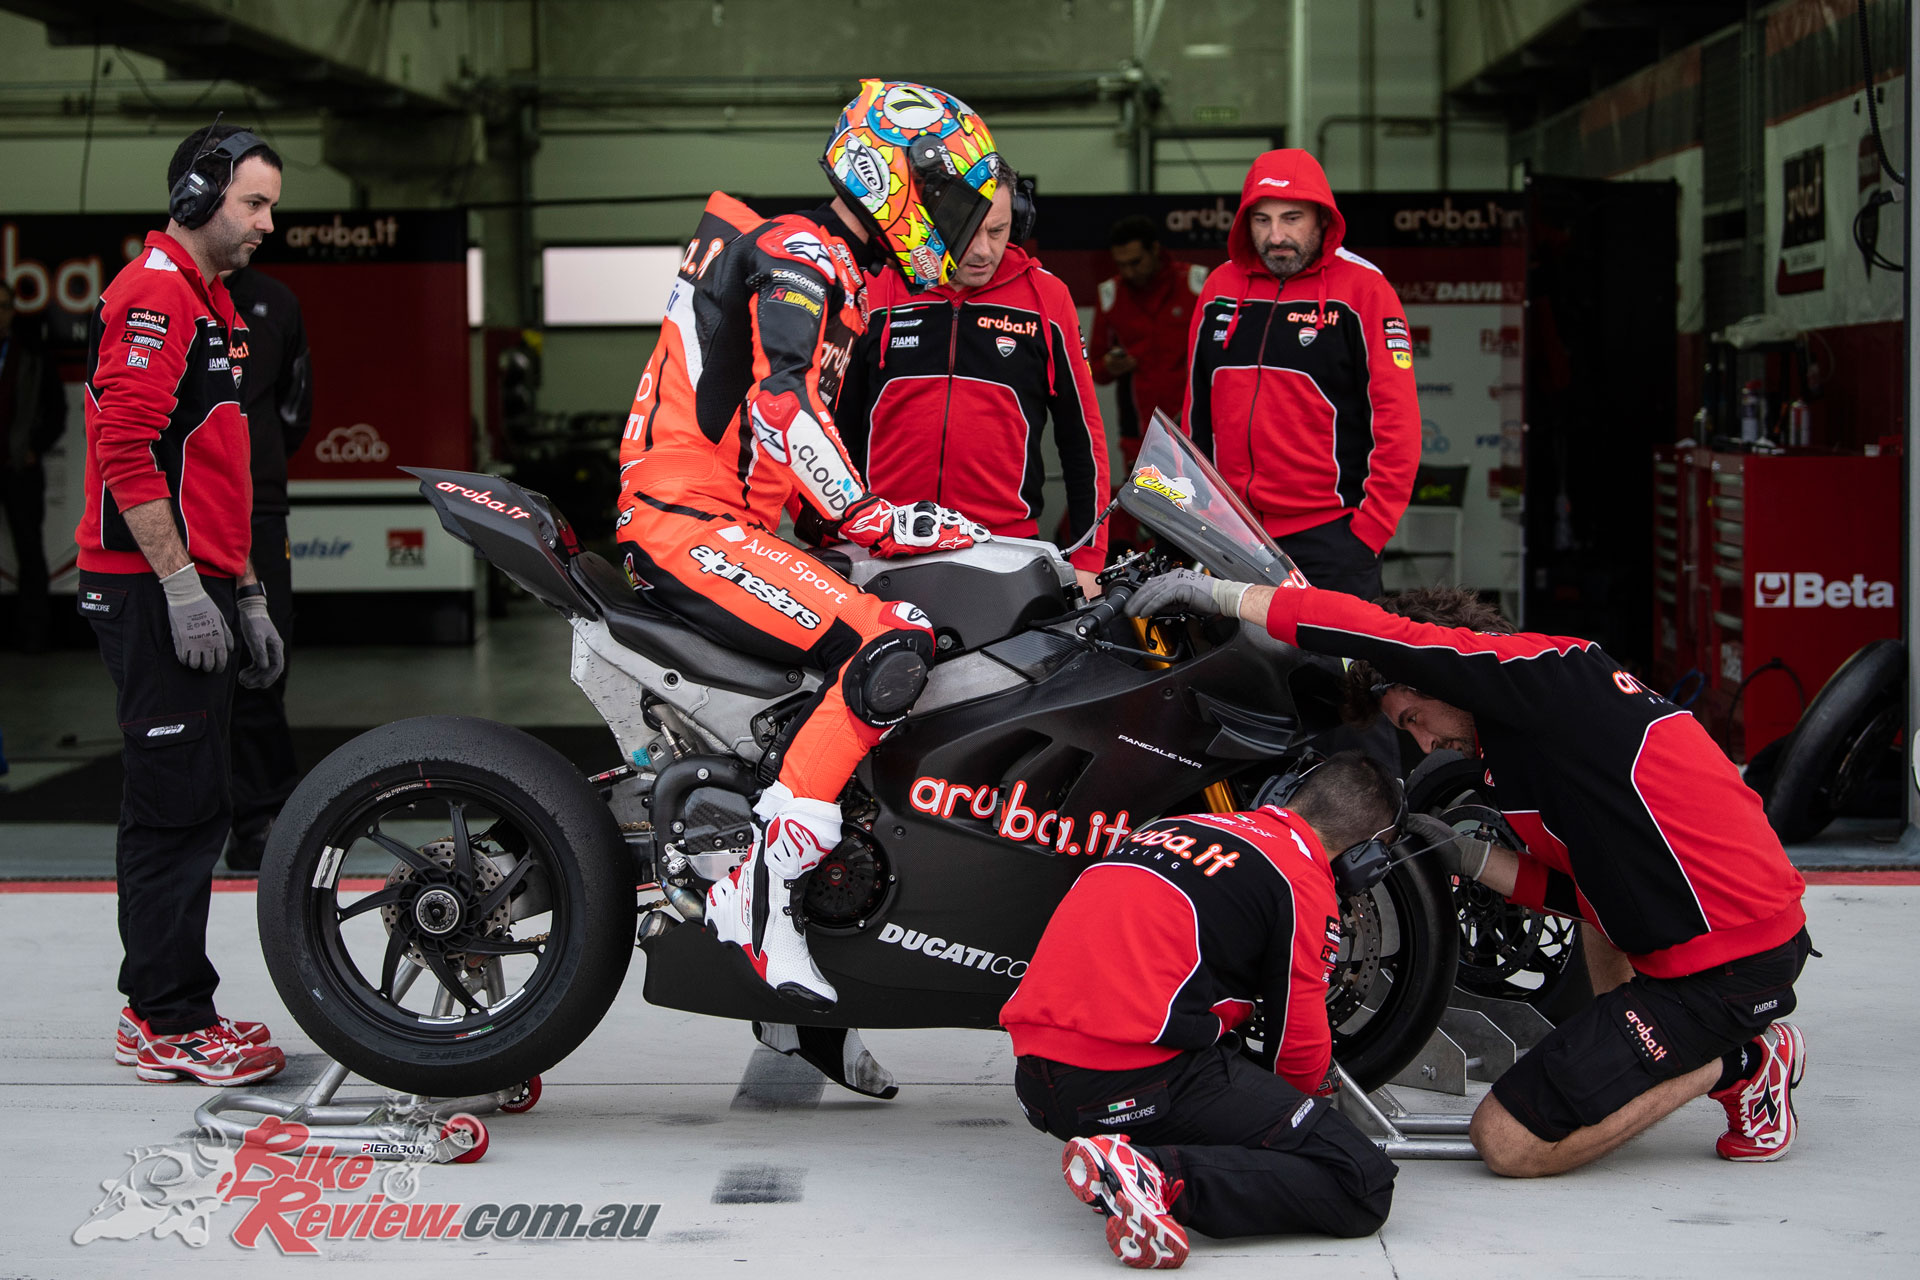 Chaz Davies on the Panigale V4 R at Aragon - Image by Geebee Images